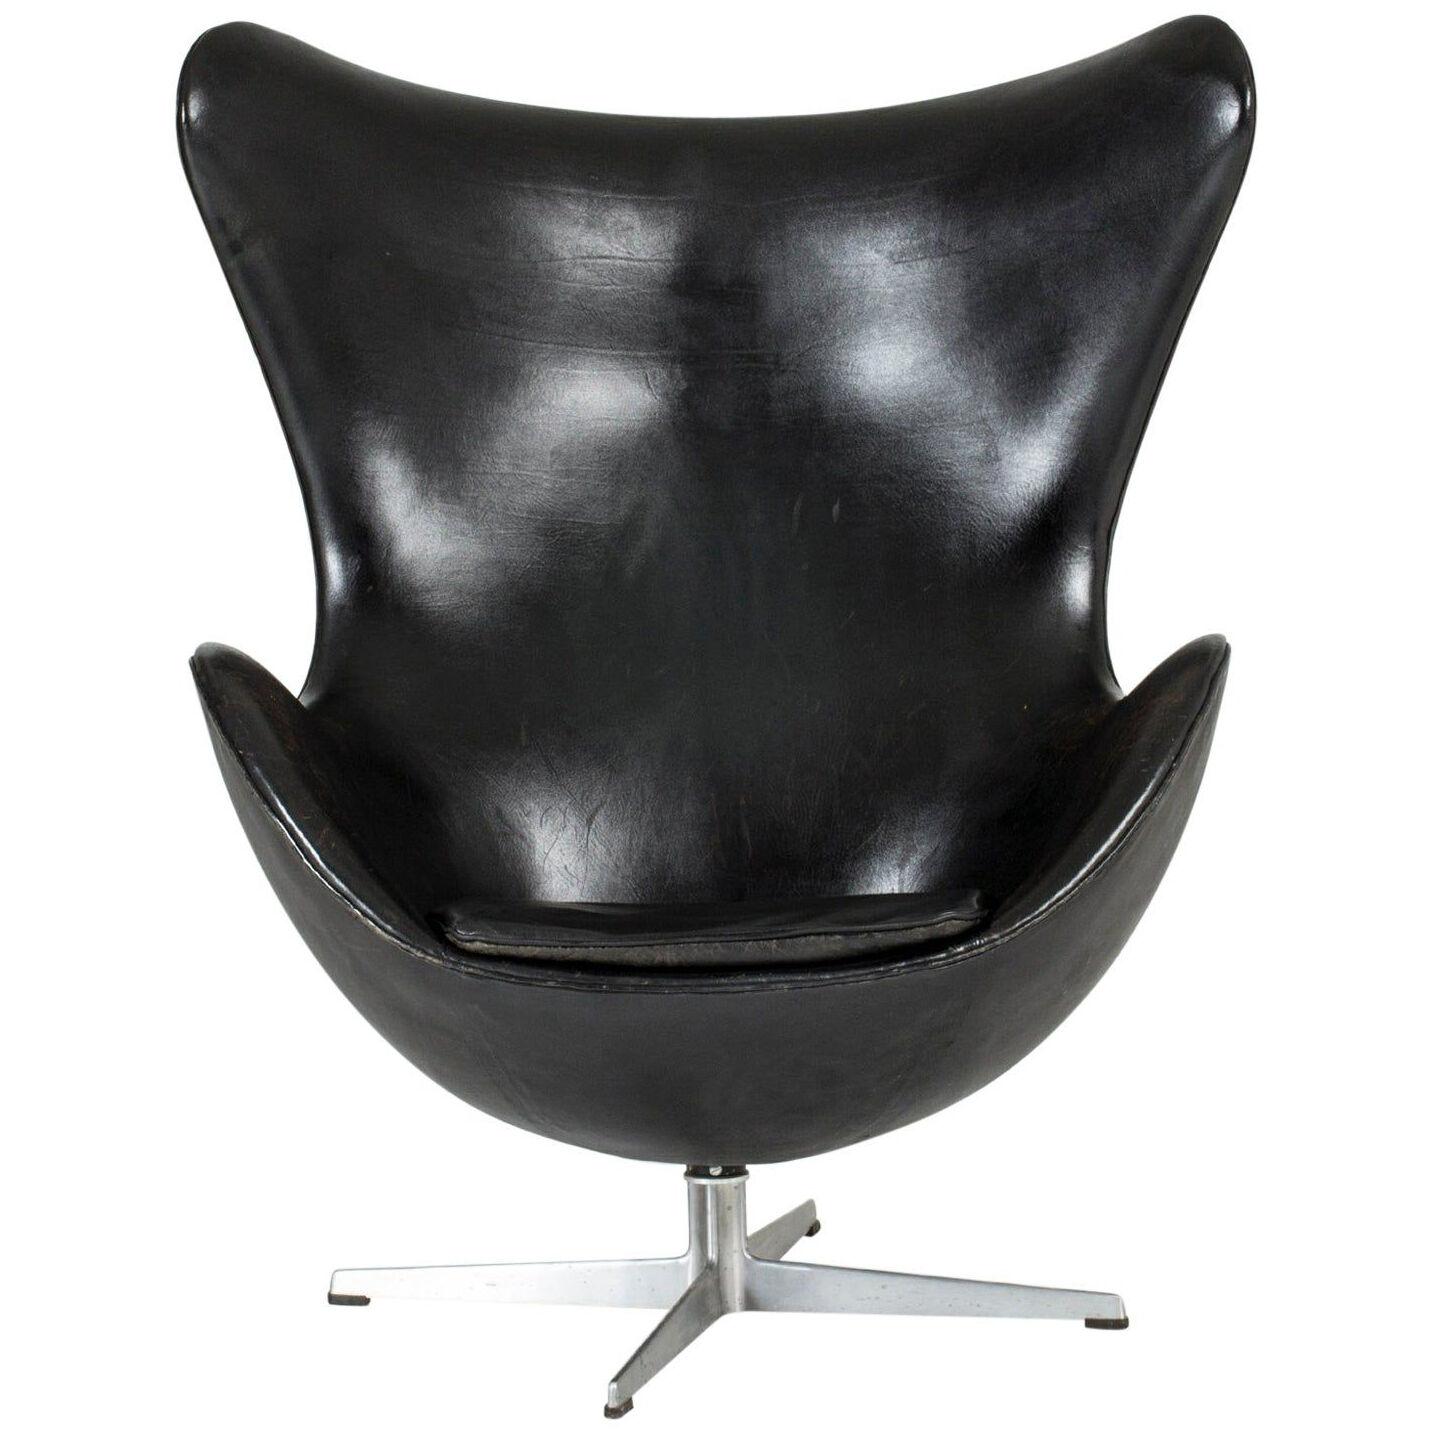 "Egg" Lounge Chair by Arne Jacobsen